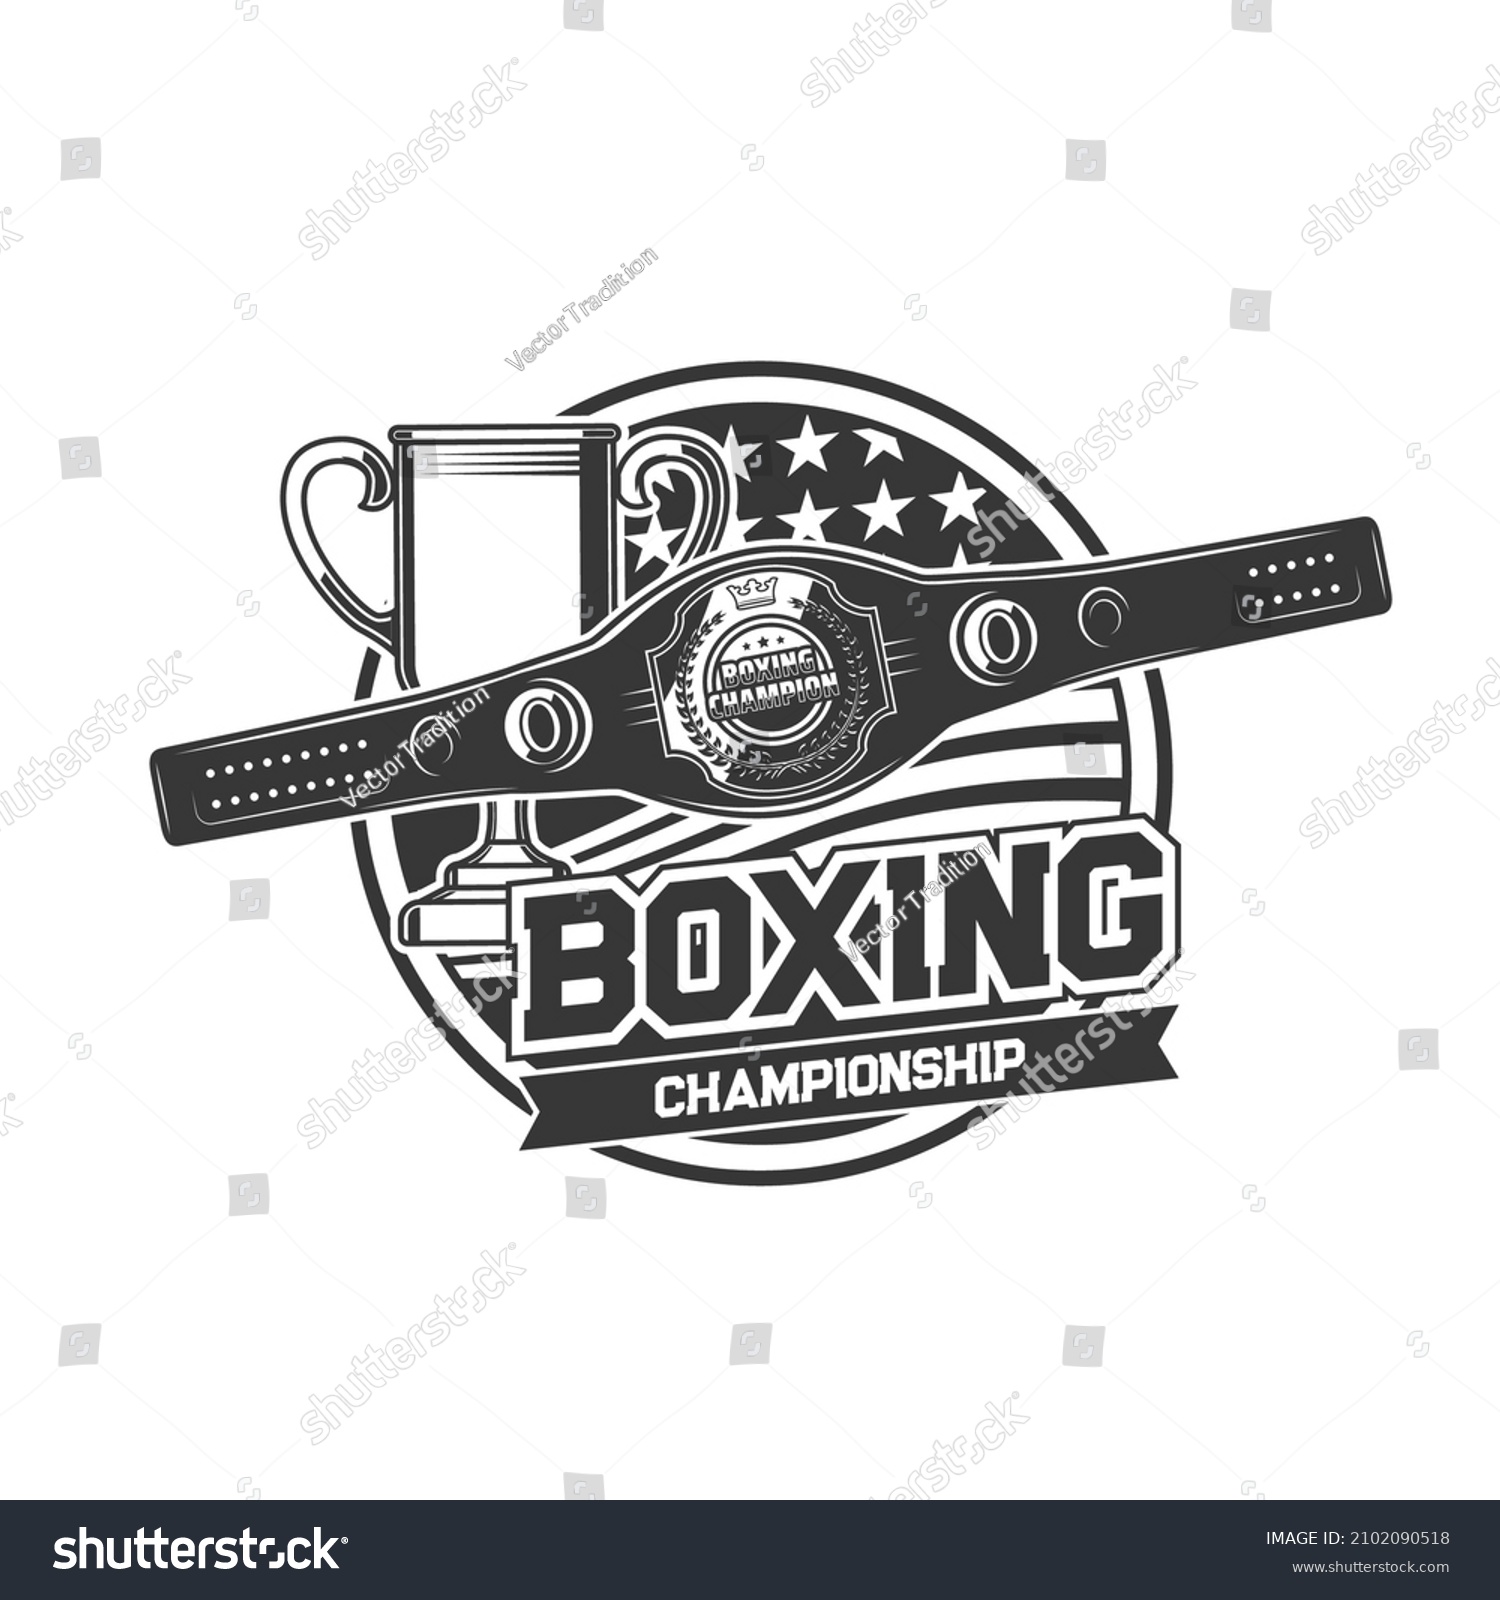 SVG of Boxing sport icon with champion belt. Boxing championship or tournament, martial arts competition monochrome vector emblem, label or icon with American flag, contest winners prizes svg